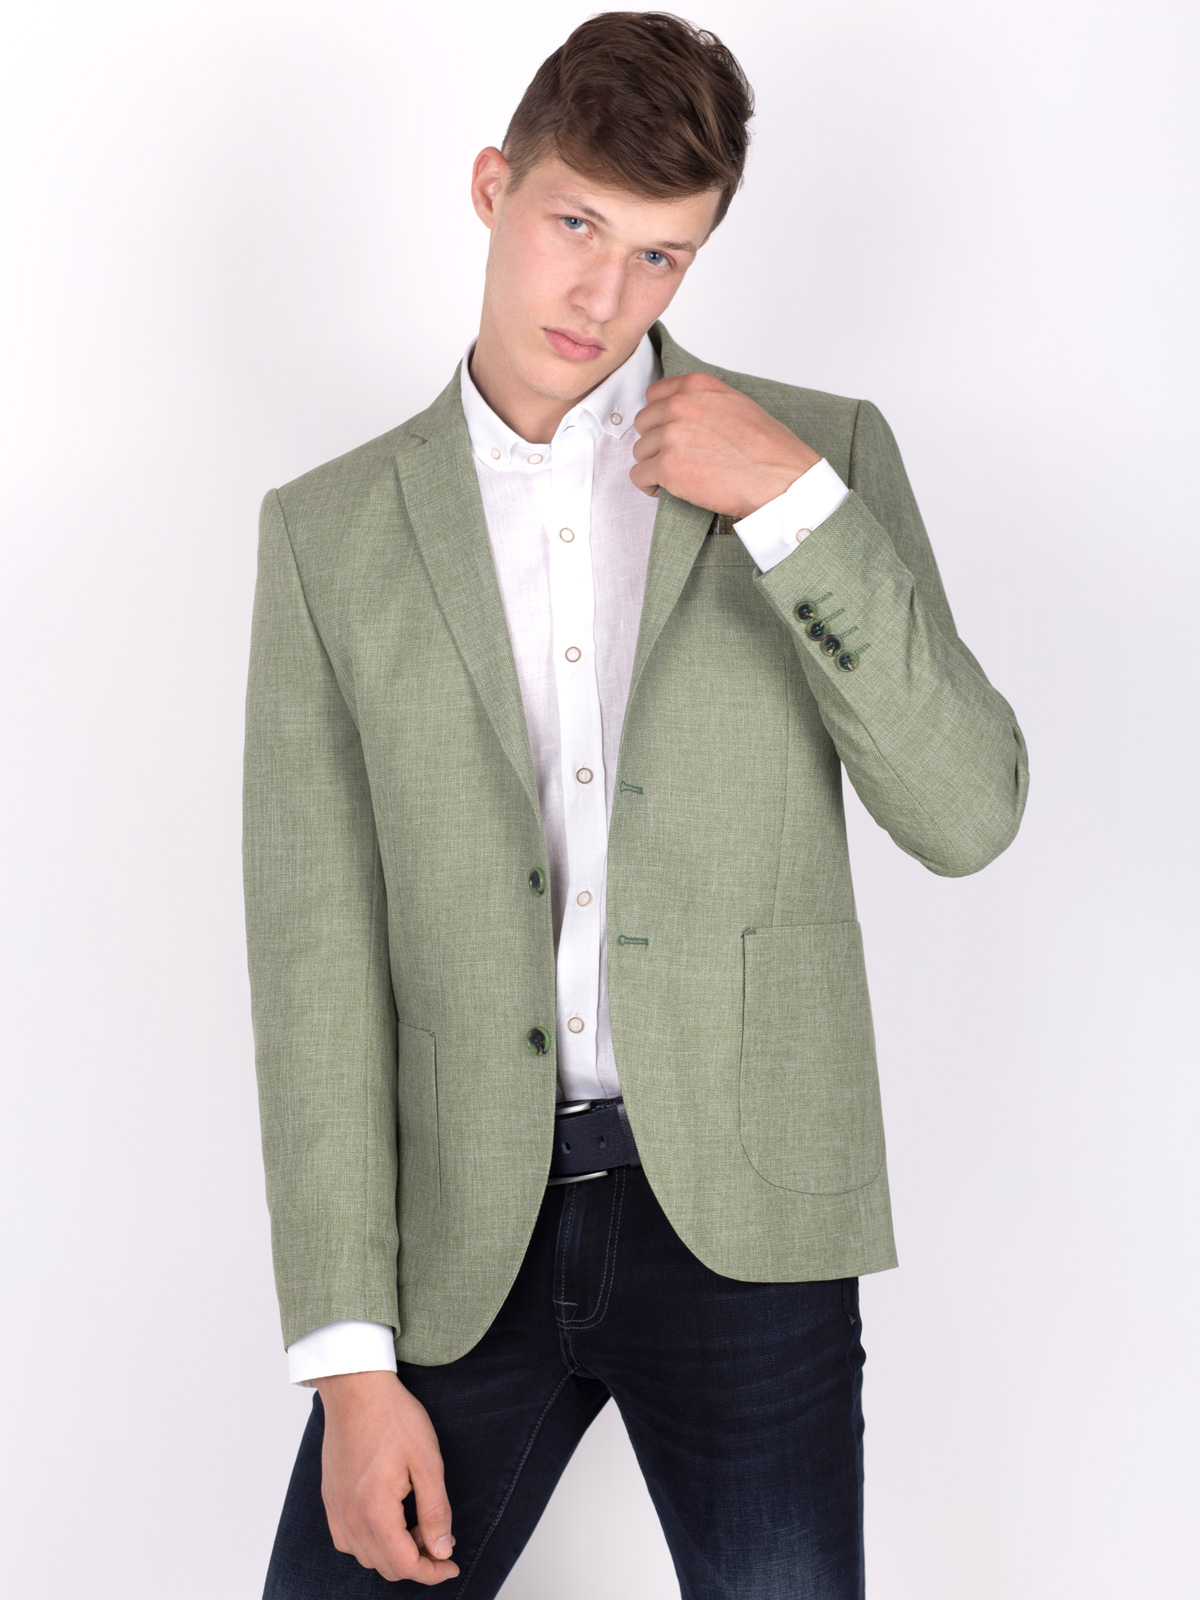 Green jacket made of linen and cotton - 64090 € 50.06 img3